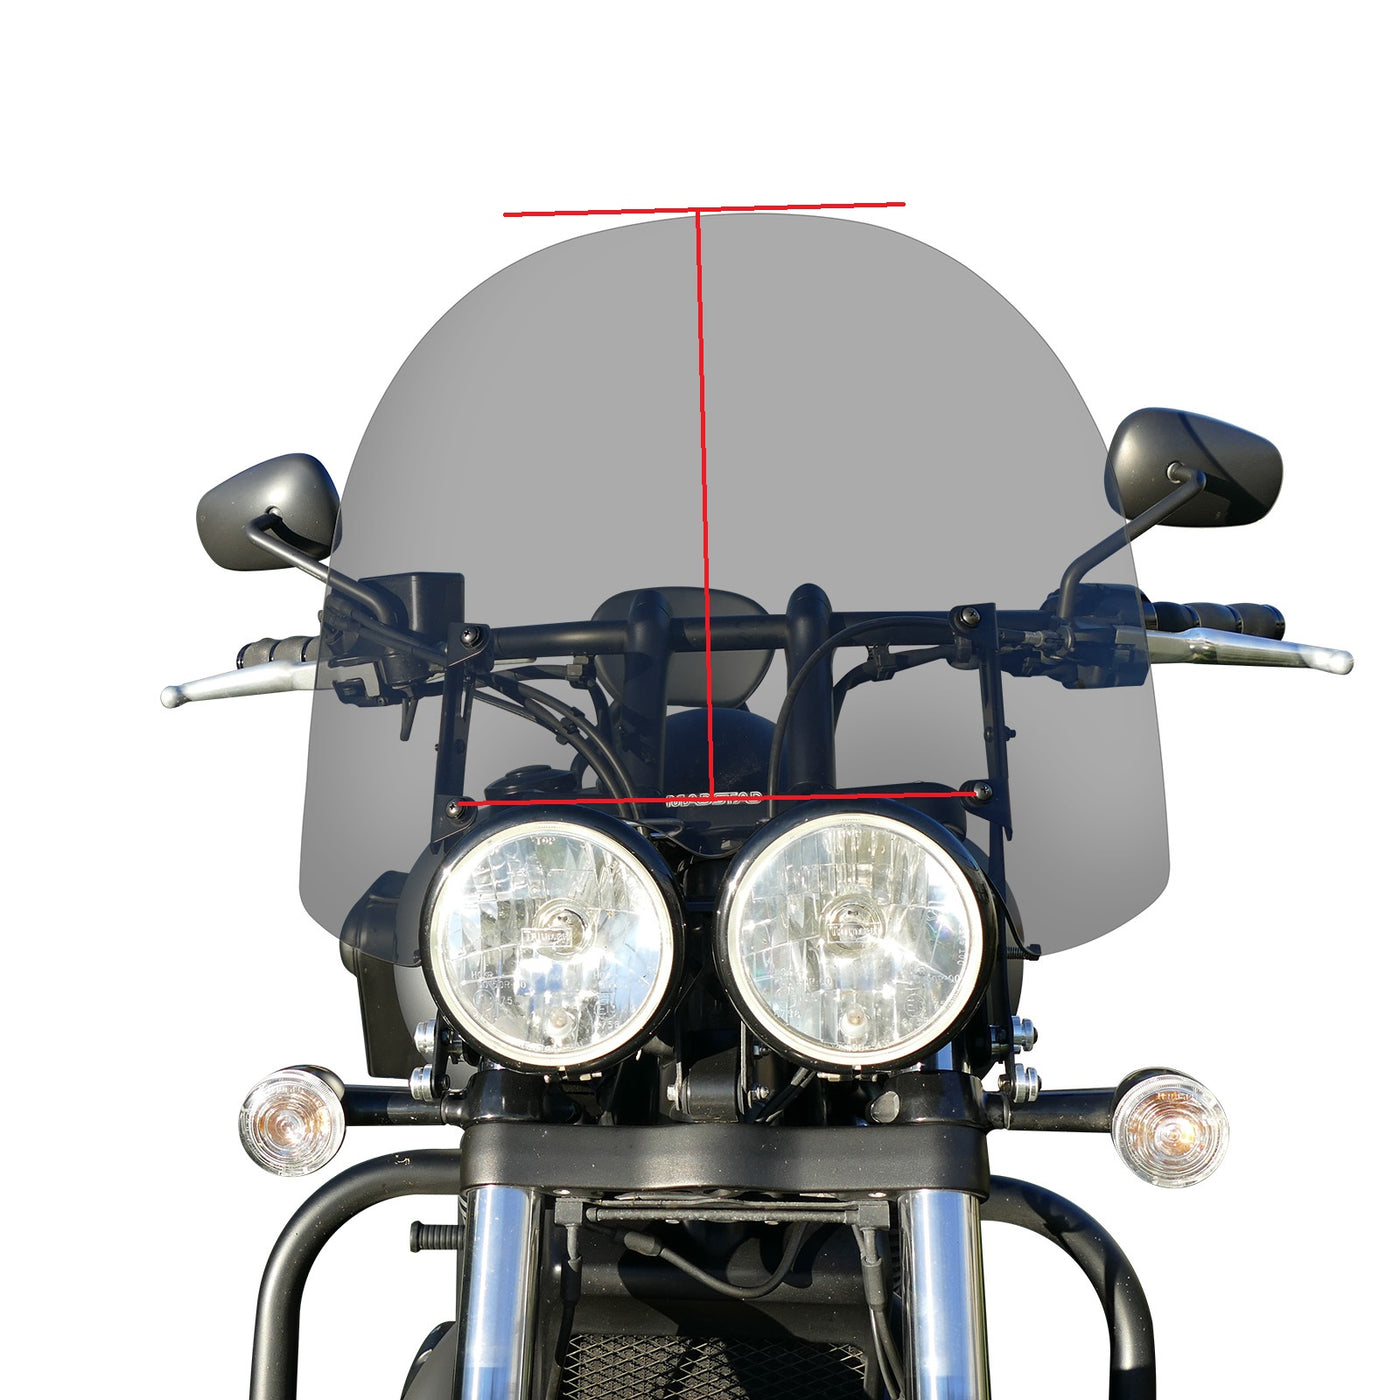 Touring Shield Upgrade Kit for Triumph Thunderbird Storm (2011 & Up)